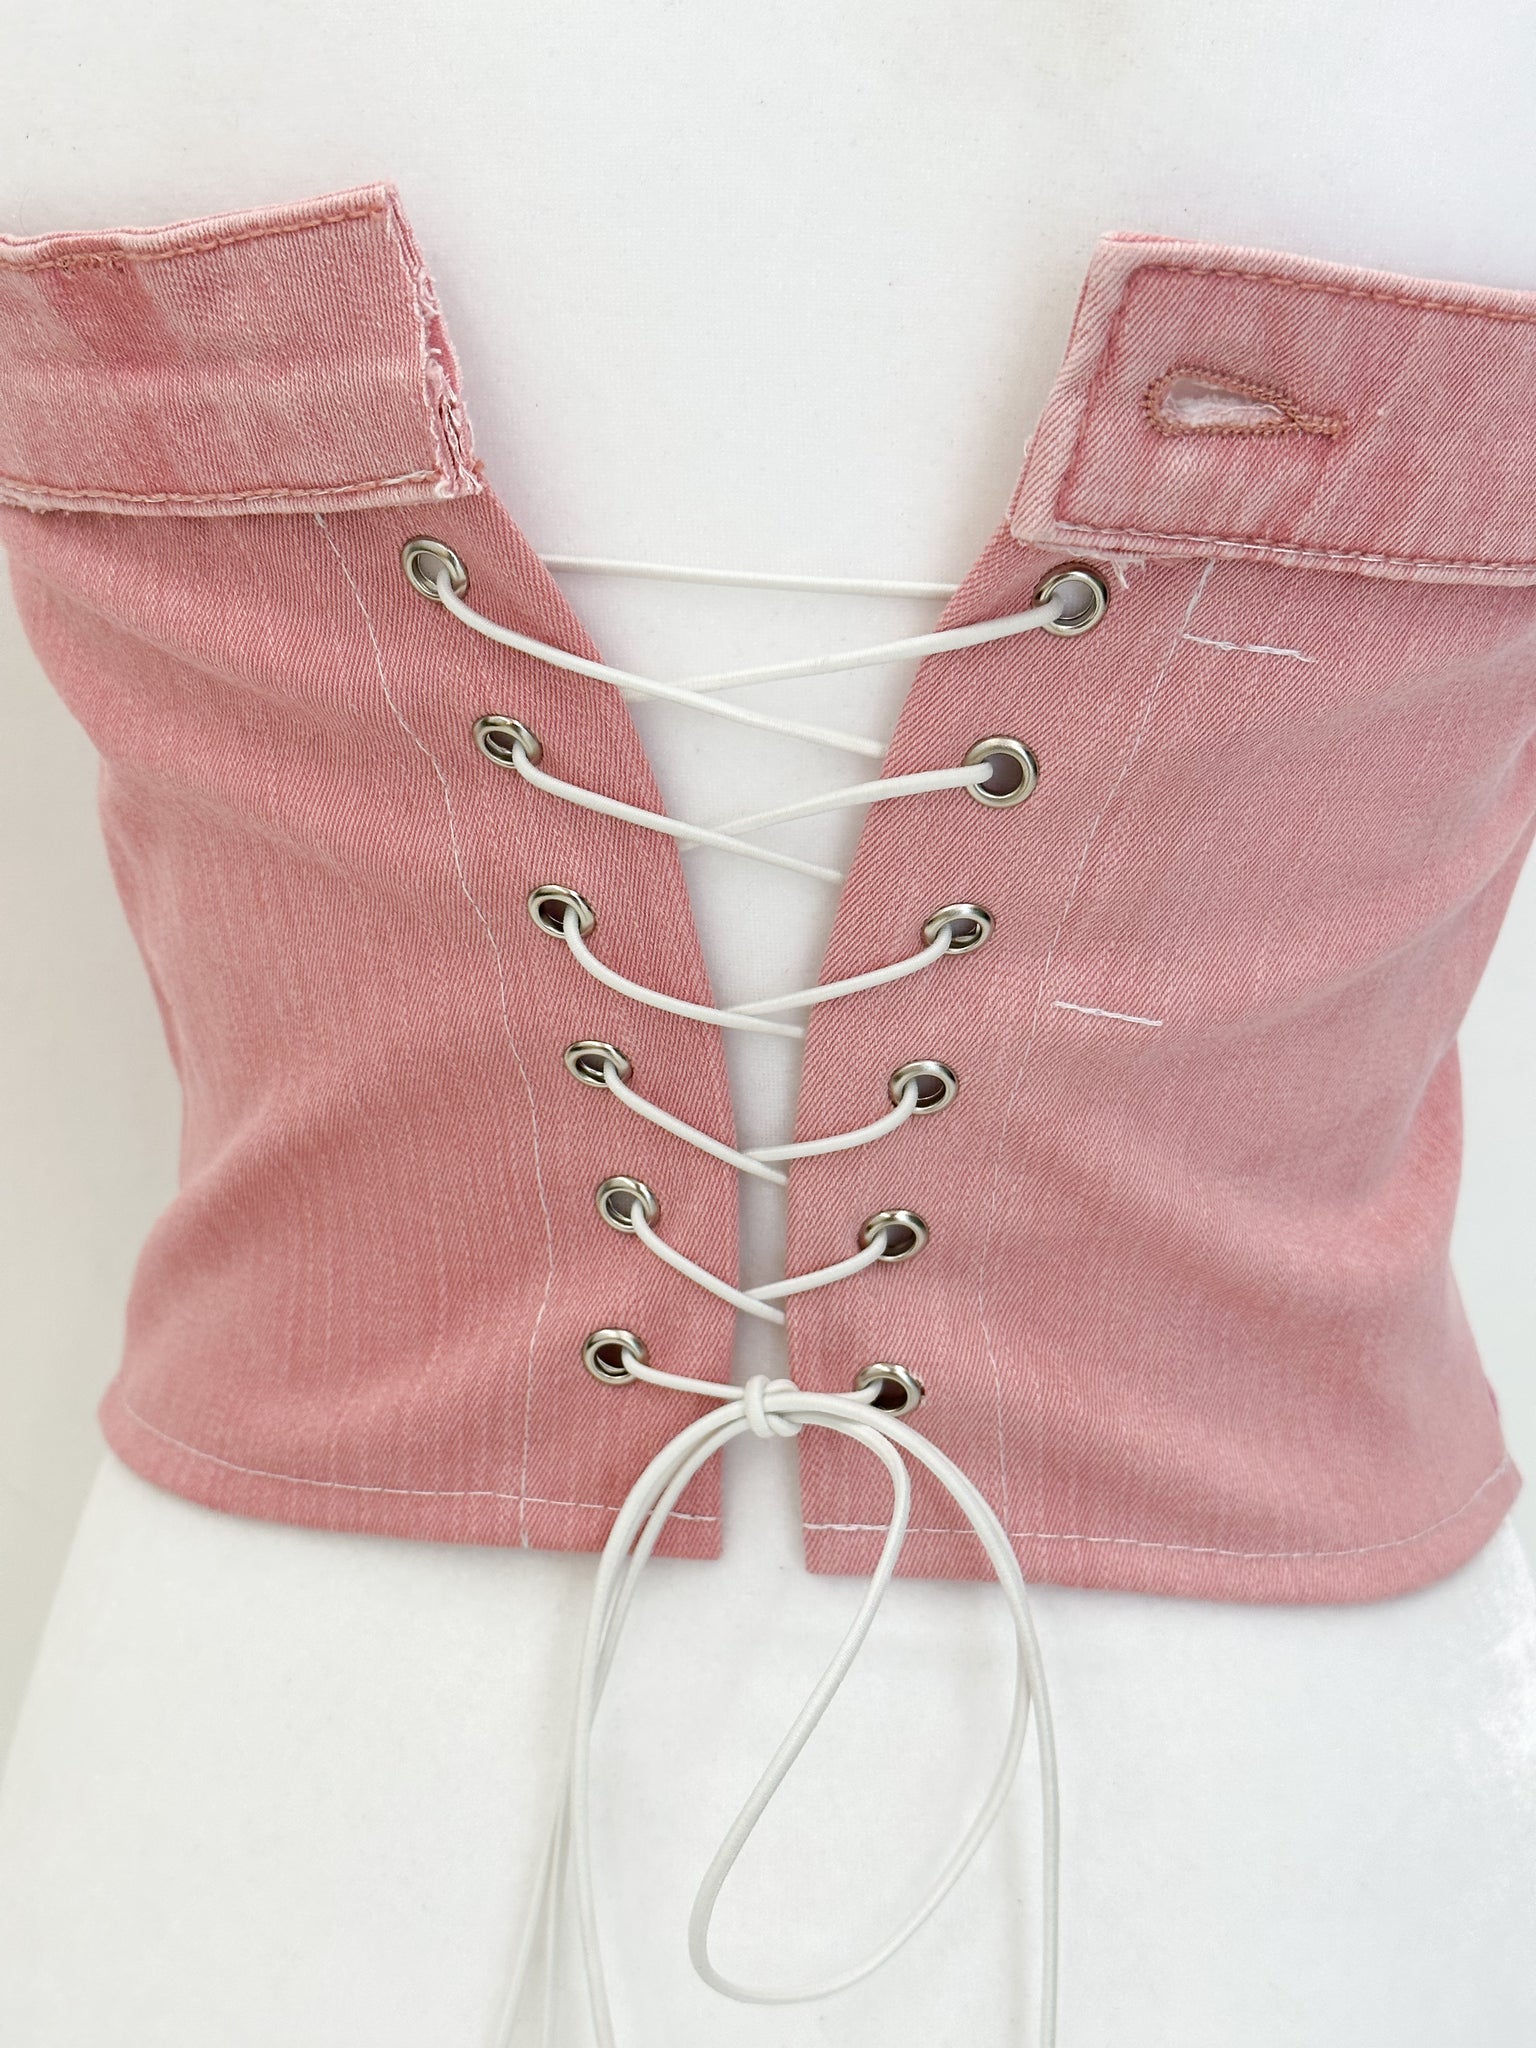 PINK TWO TONE CORSET